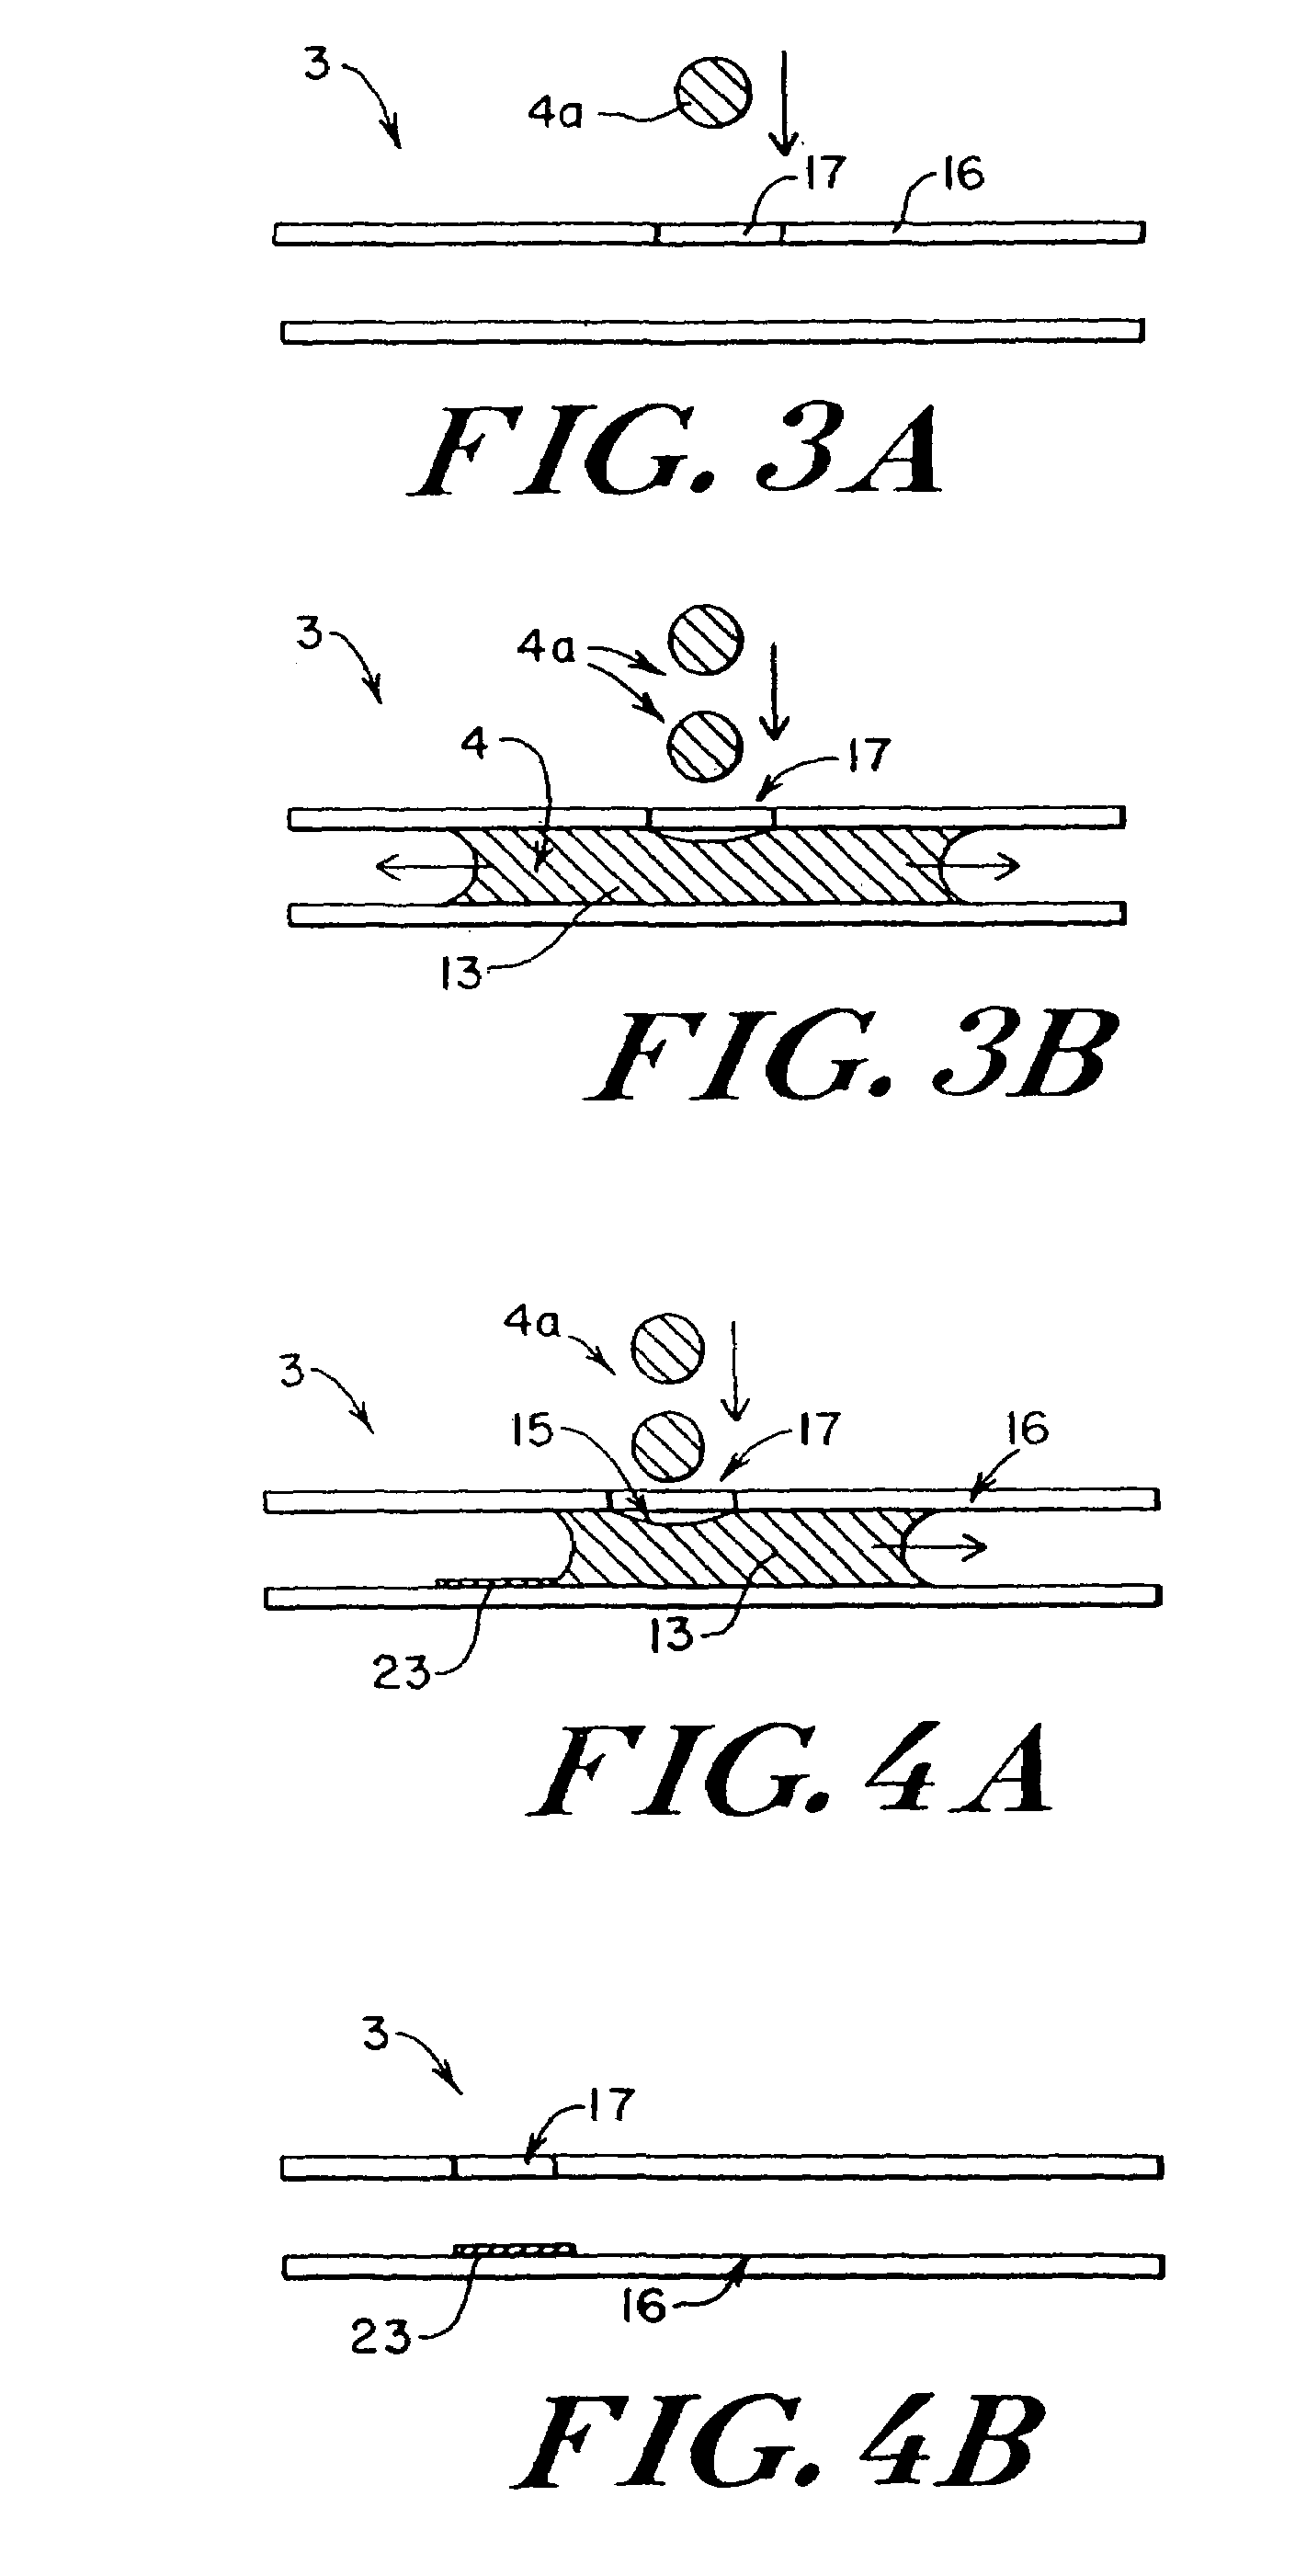 Microfluidic system including a virtual wall fluid interface port for interfacing fluids with the microfluidic system